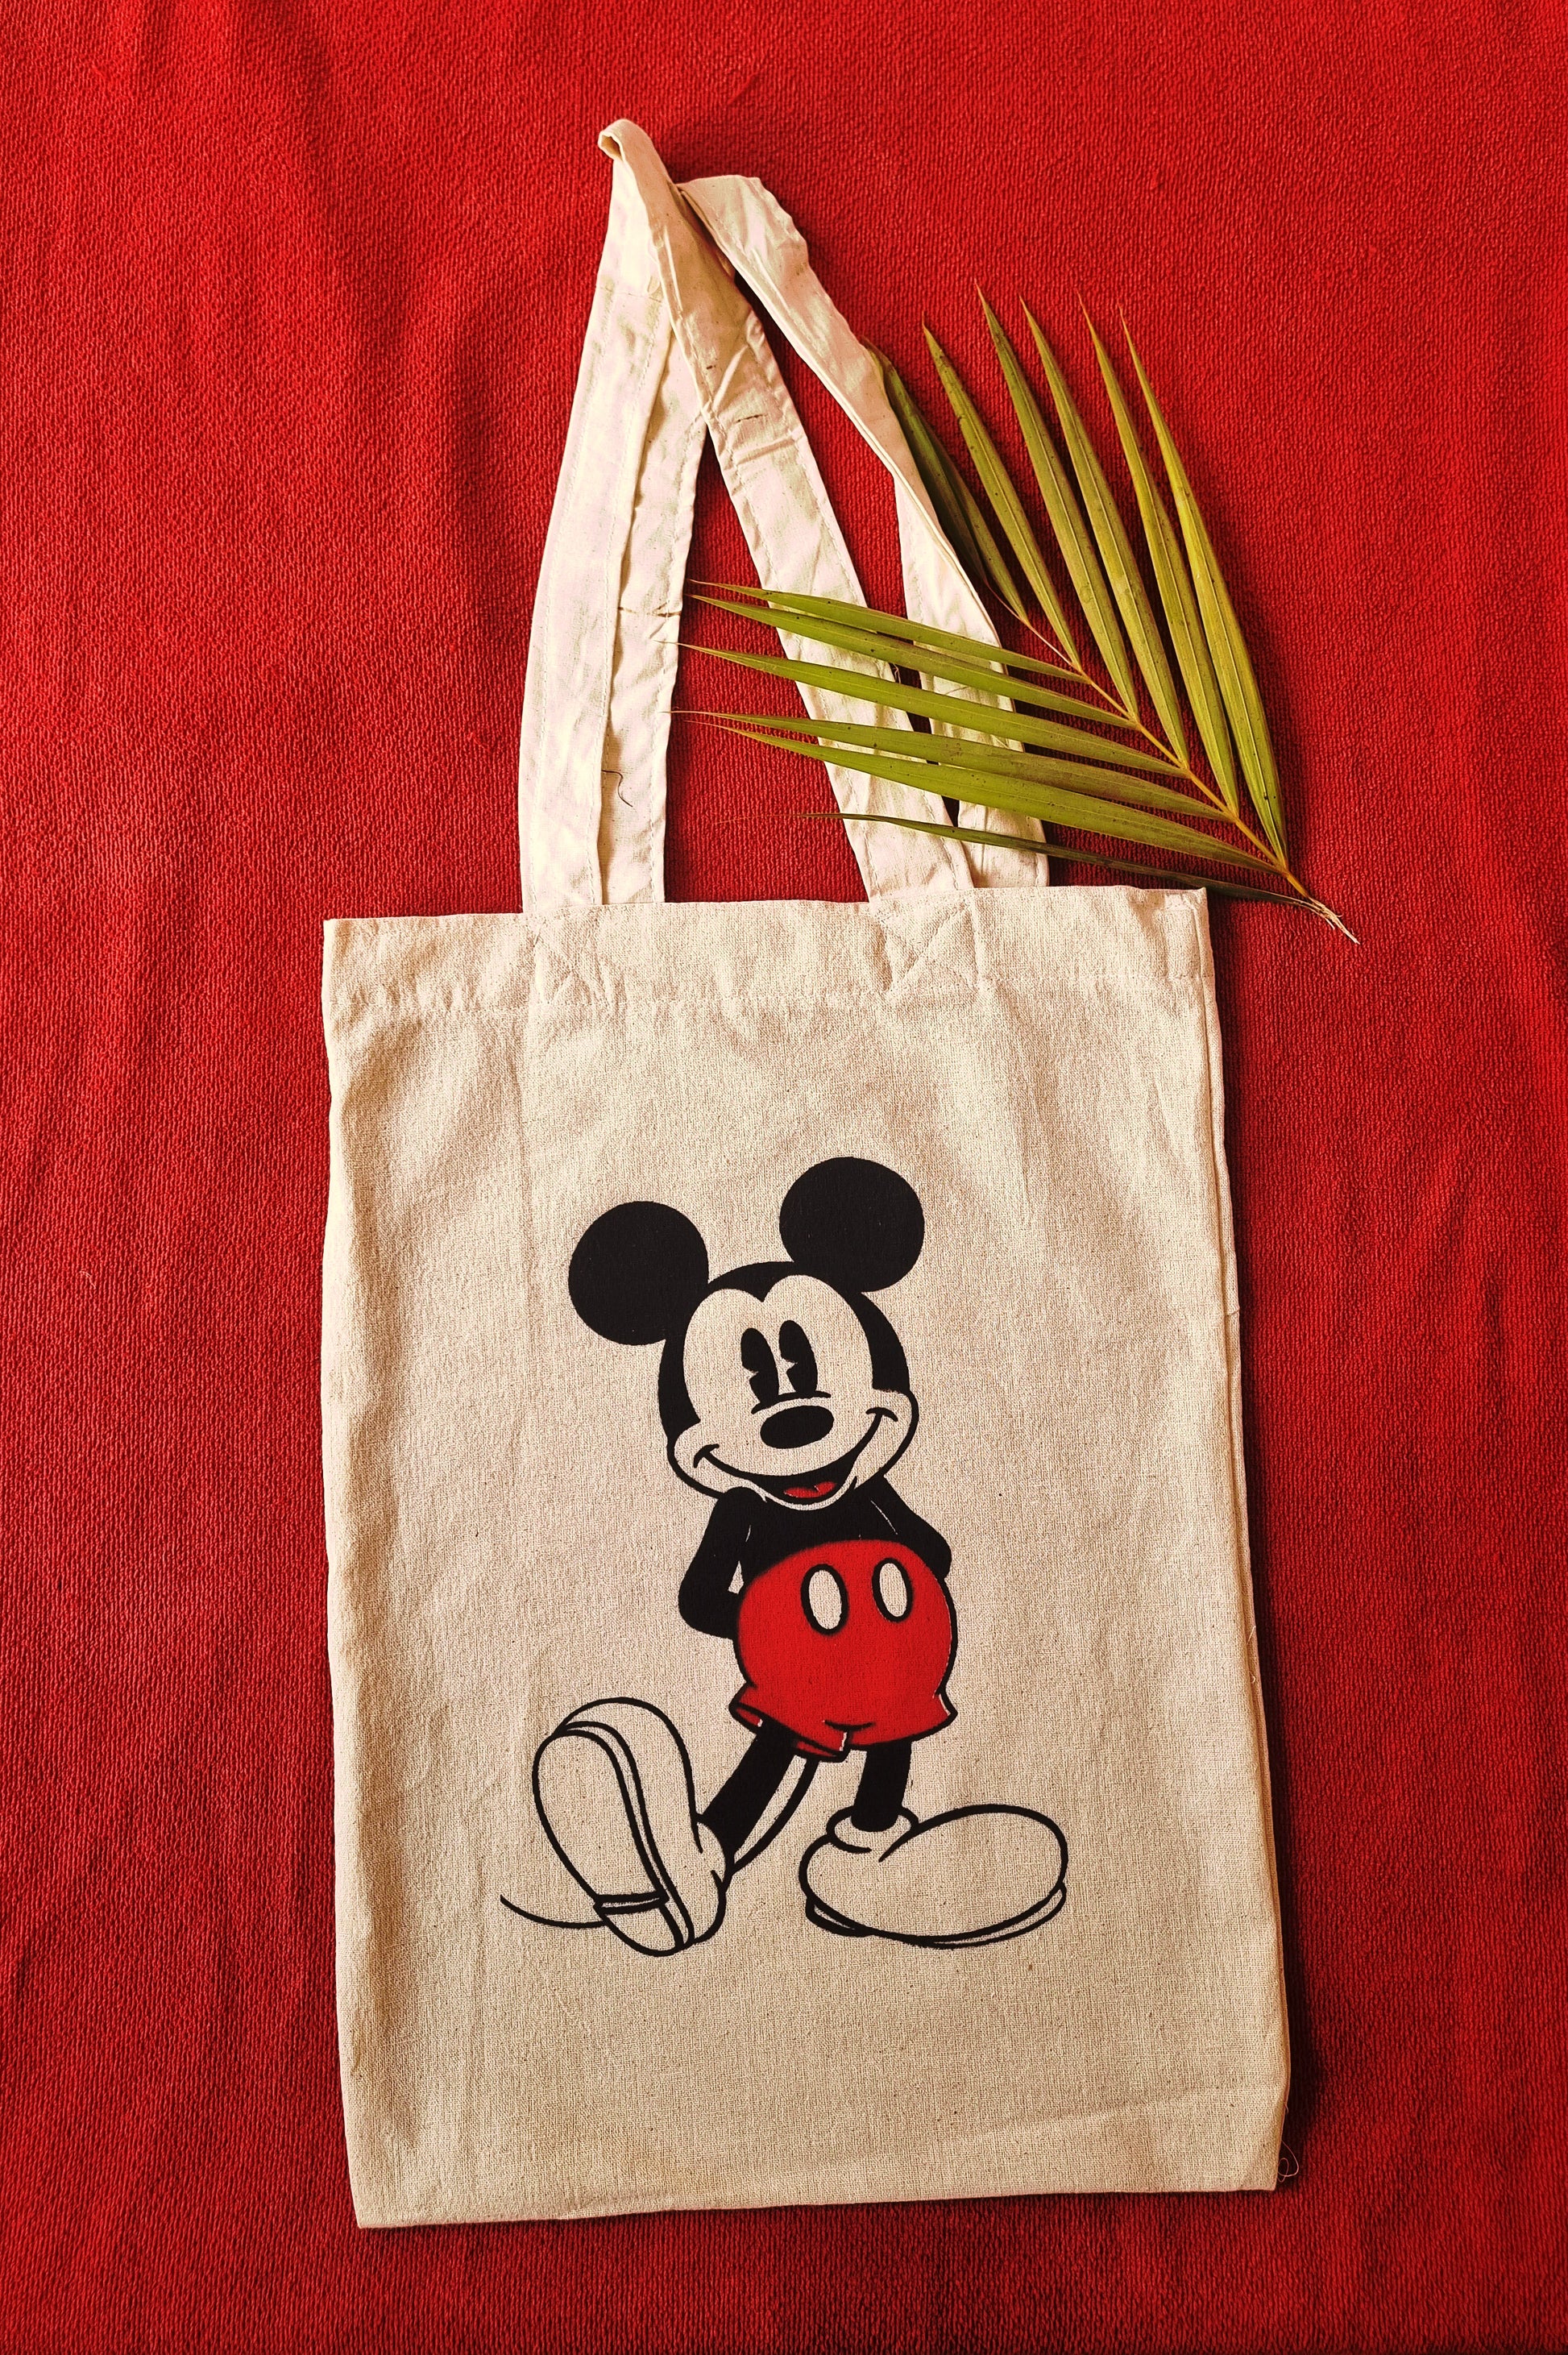 Micky Mouse tote bag for study for kids